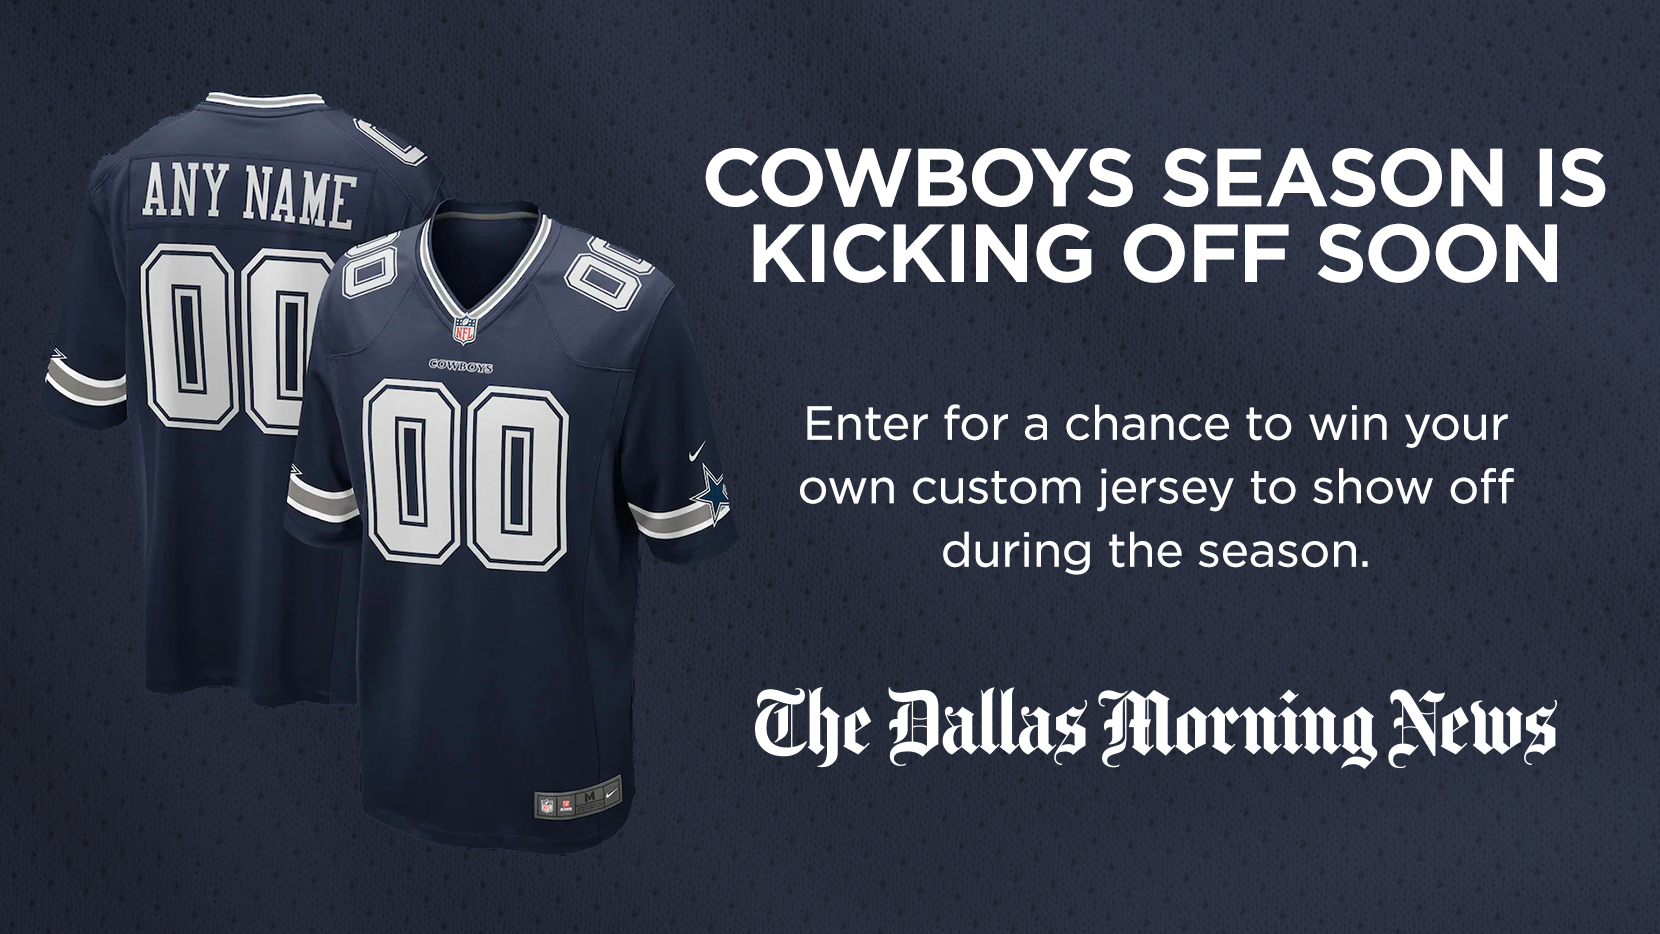 Round 2 of our FREE COWBOYS JERSEY GIVEAWAY ! 💙 Pregame with us